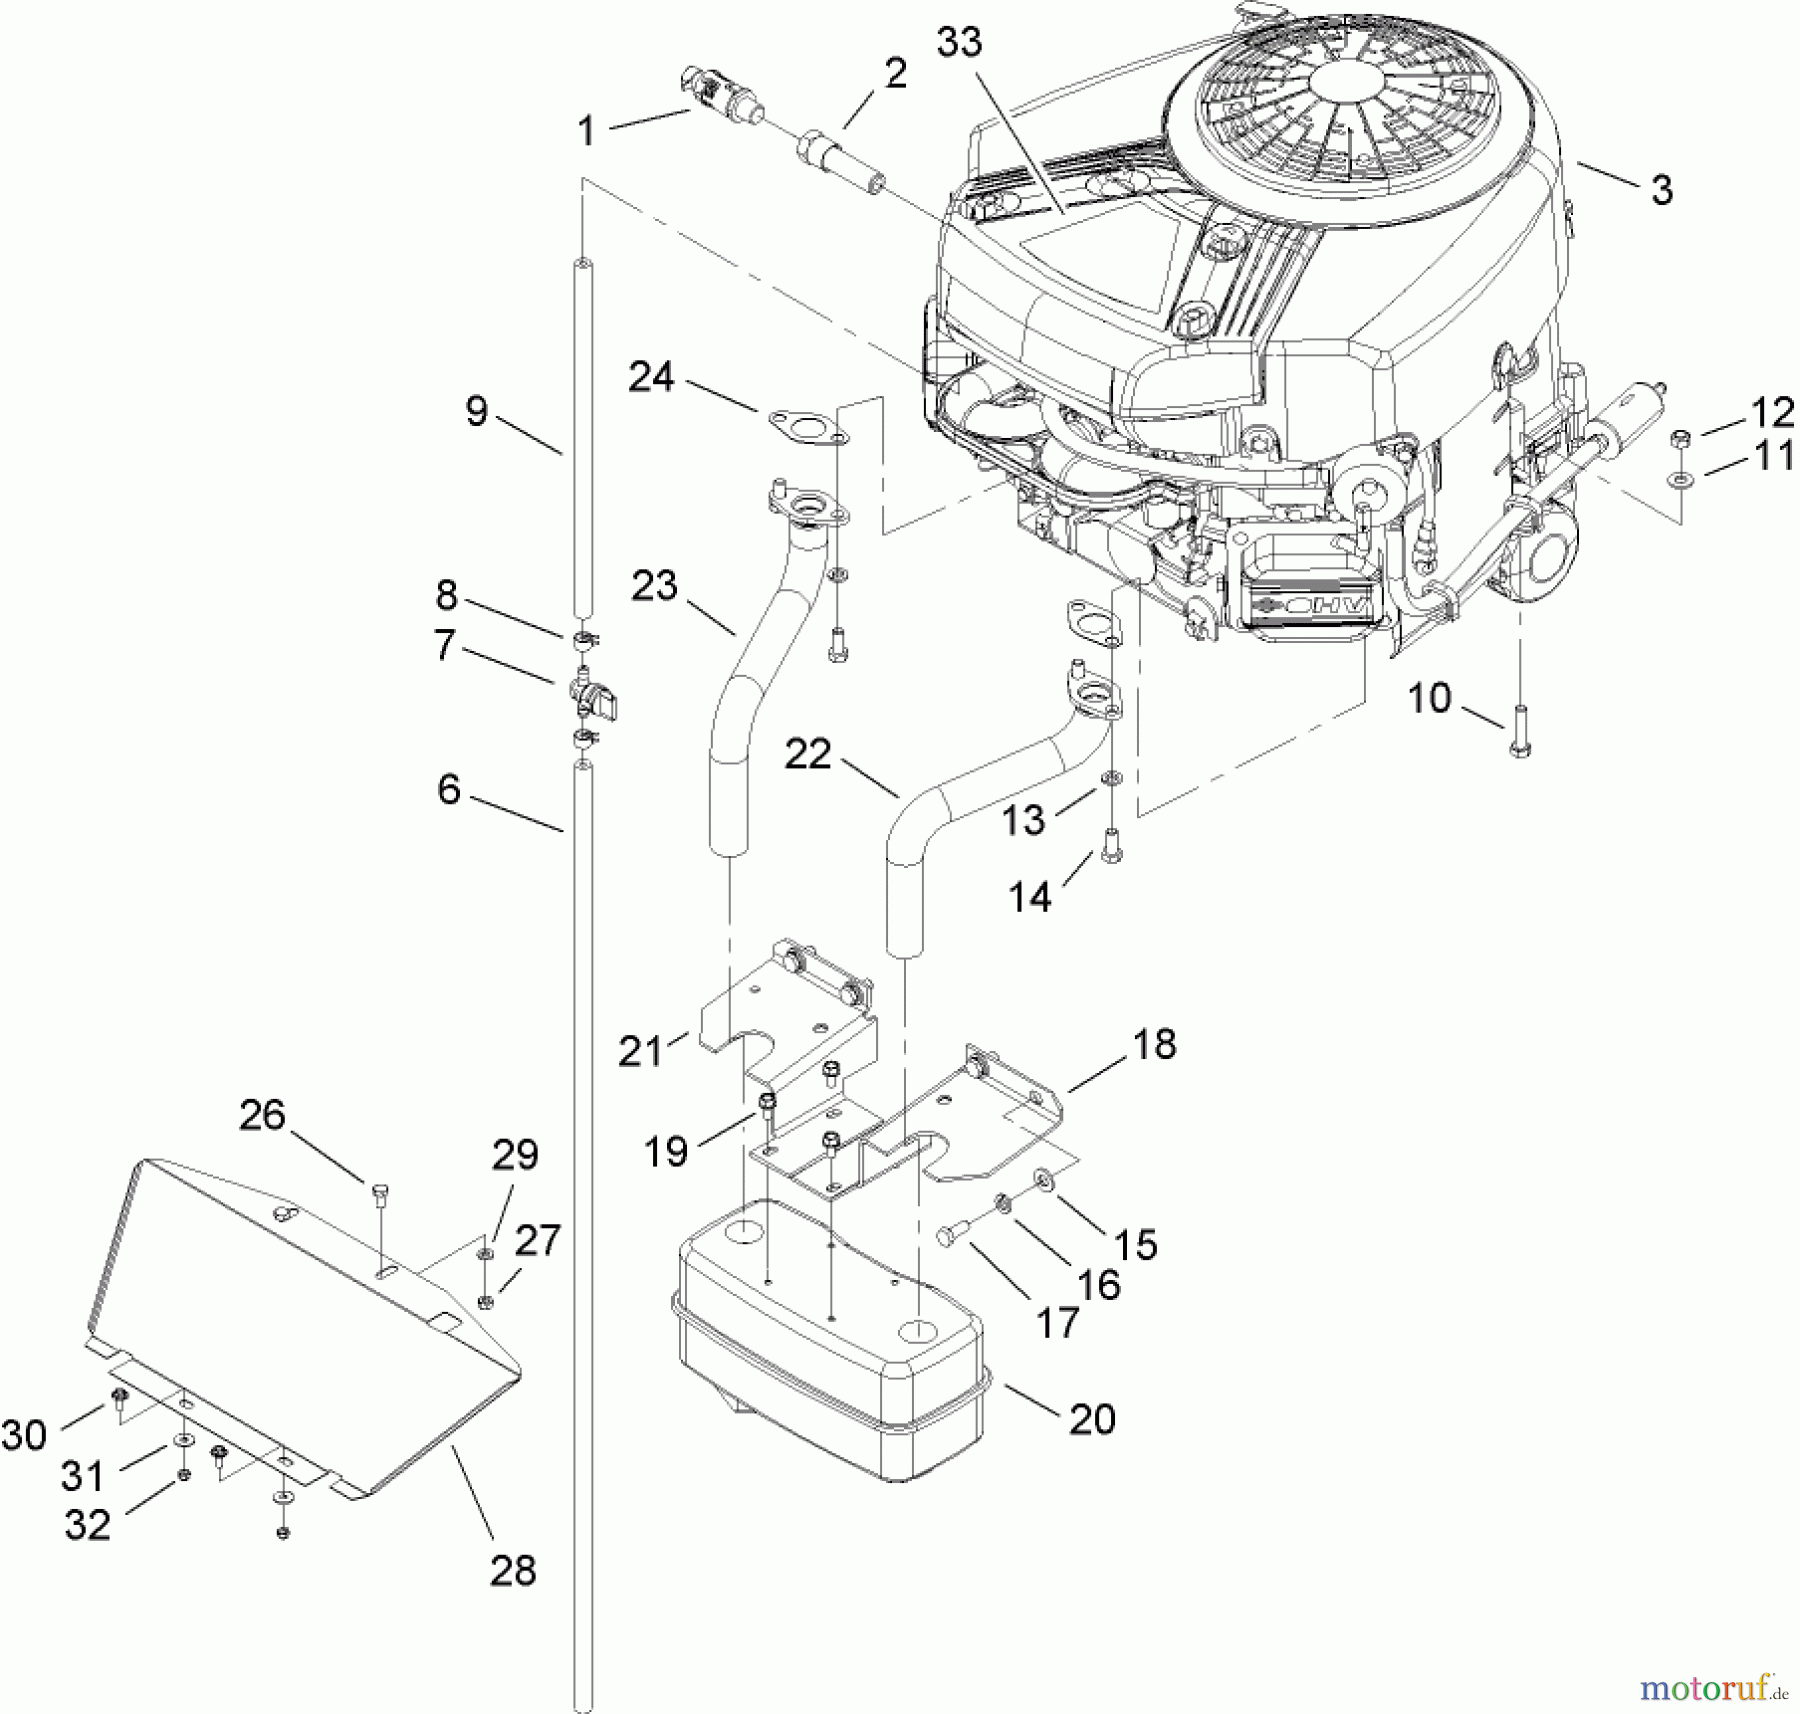  Toro Neu Mowers, Lawn & Garden Tractor Seite 1 74592 (DH 220) - Toro DH 220 Lawn Tractor, 2007 (270000652-270999999) ENGINE ASSEMBLY